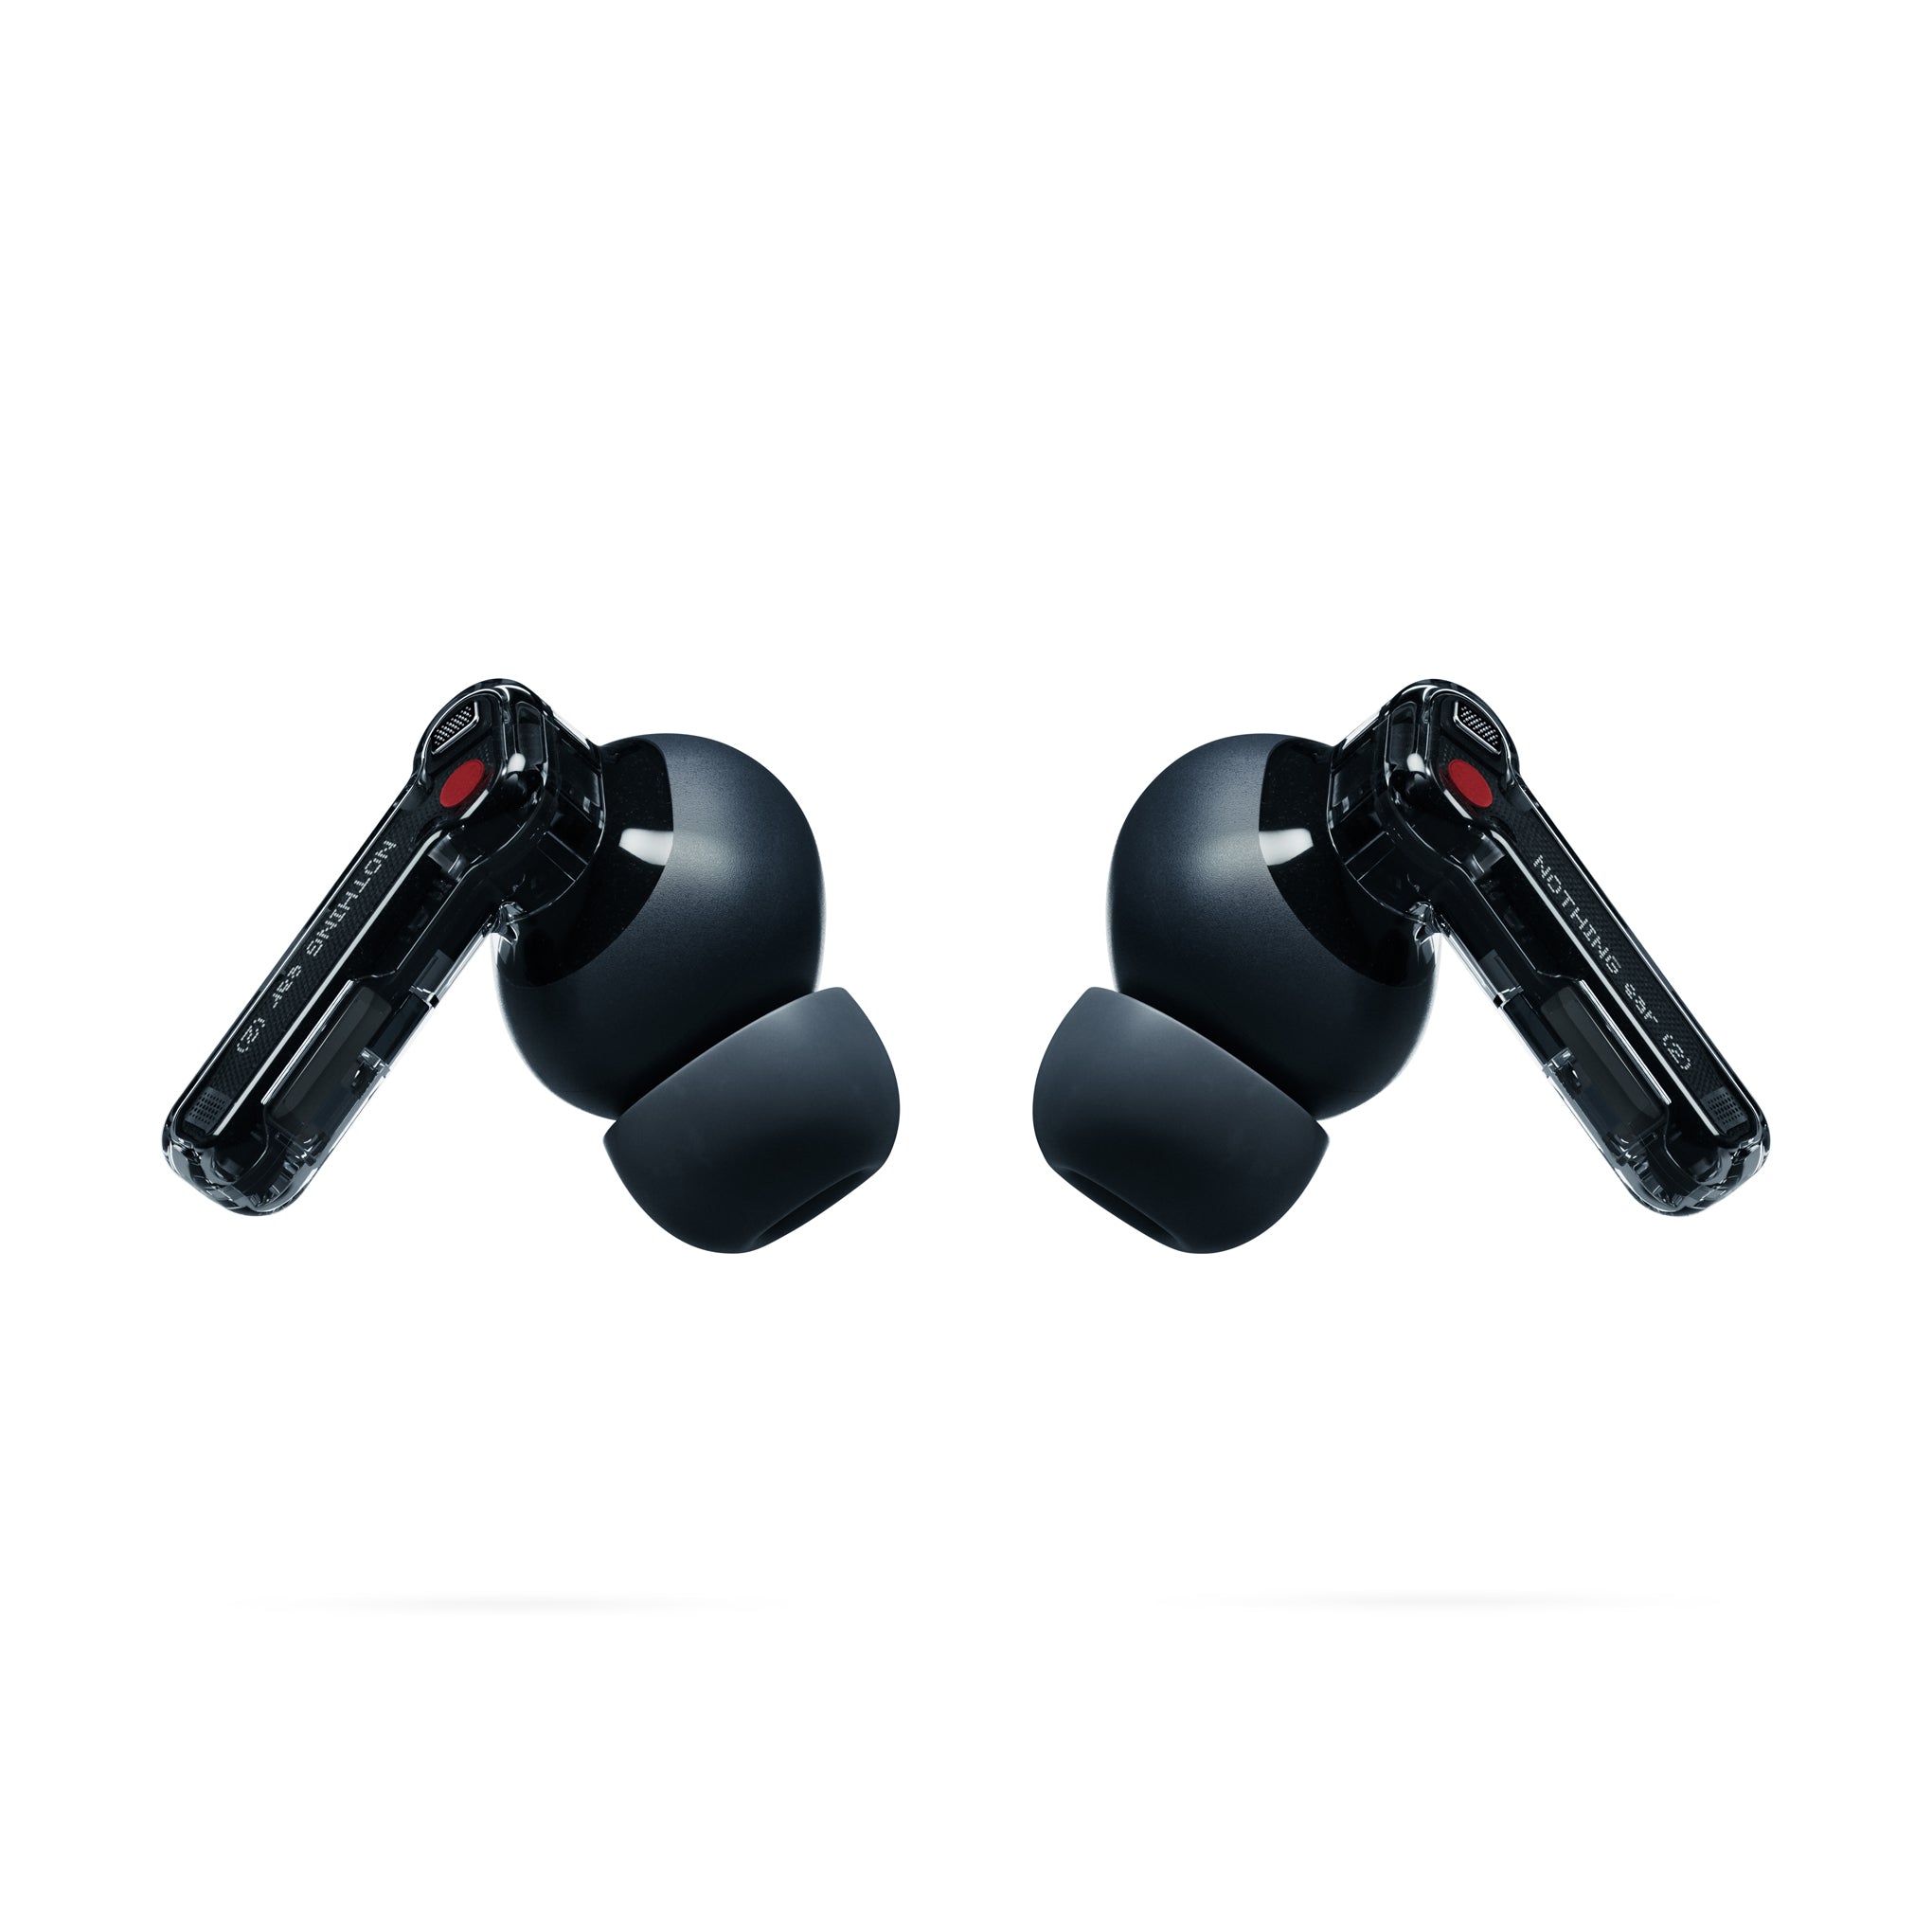 Nothing Launches Ear (2) - The Ultimate Hi-Res Audio Certified True  Wireless Earbuds